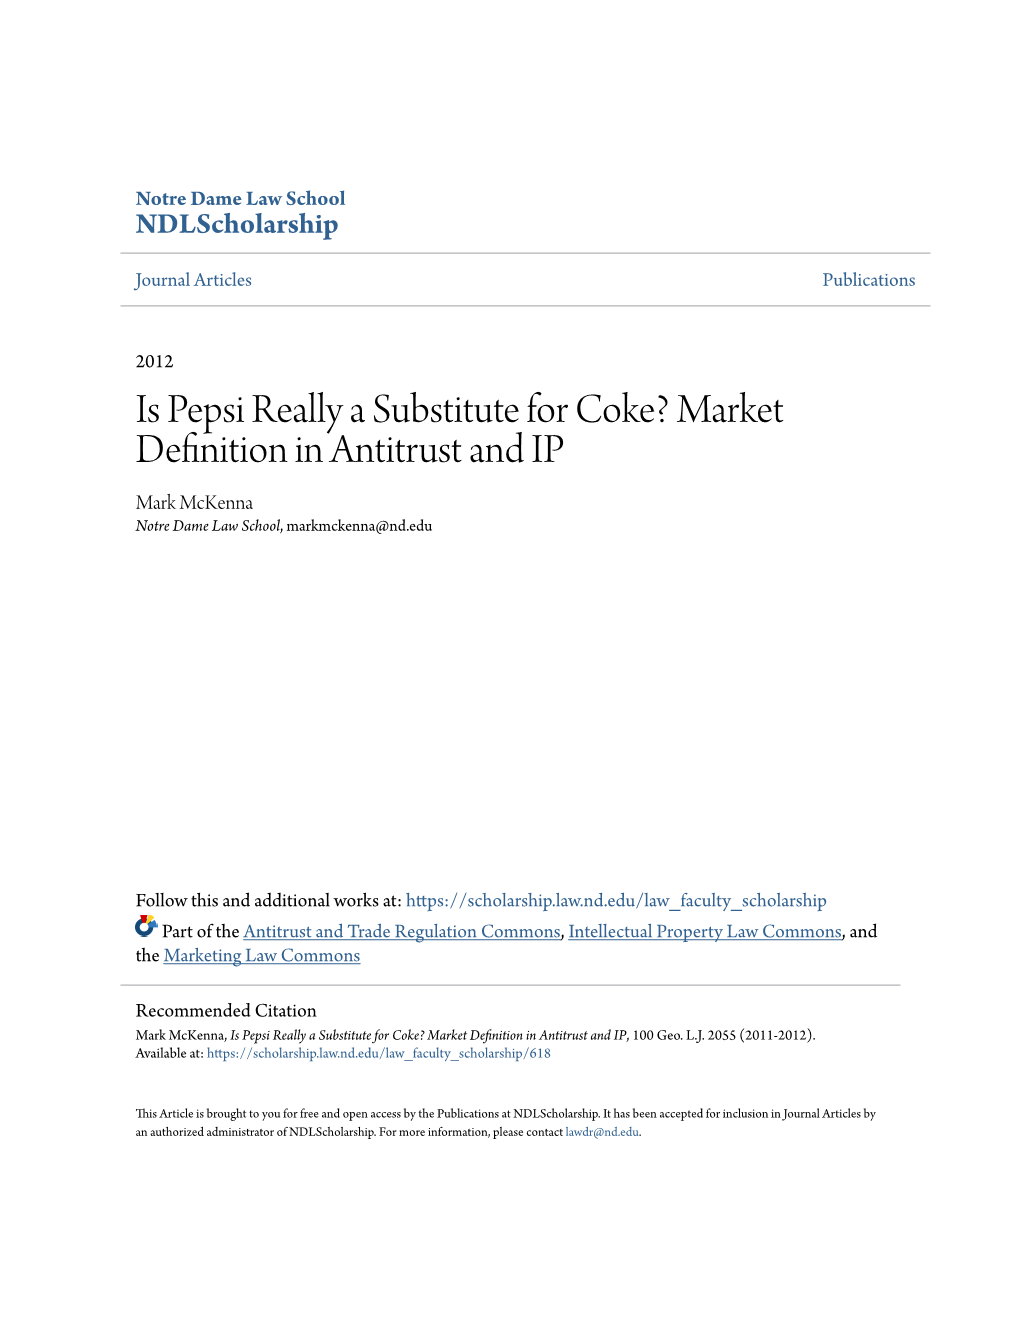 Is Pepsi Really a Substitute for Coke? Market Definition in Antitrust and IP Mark Mckenna Notre Dame Law School, Markmckenna@Nd.Edu